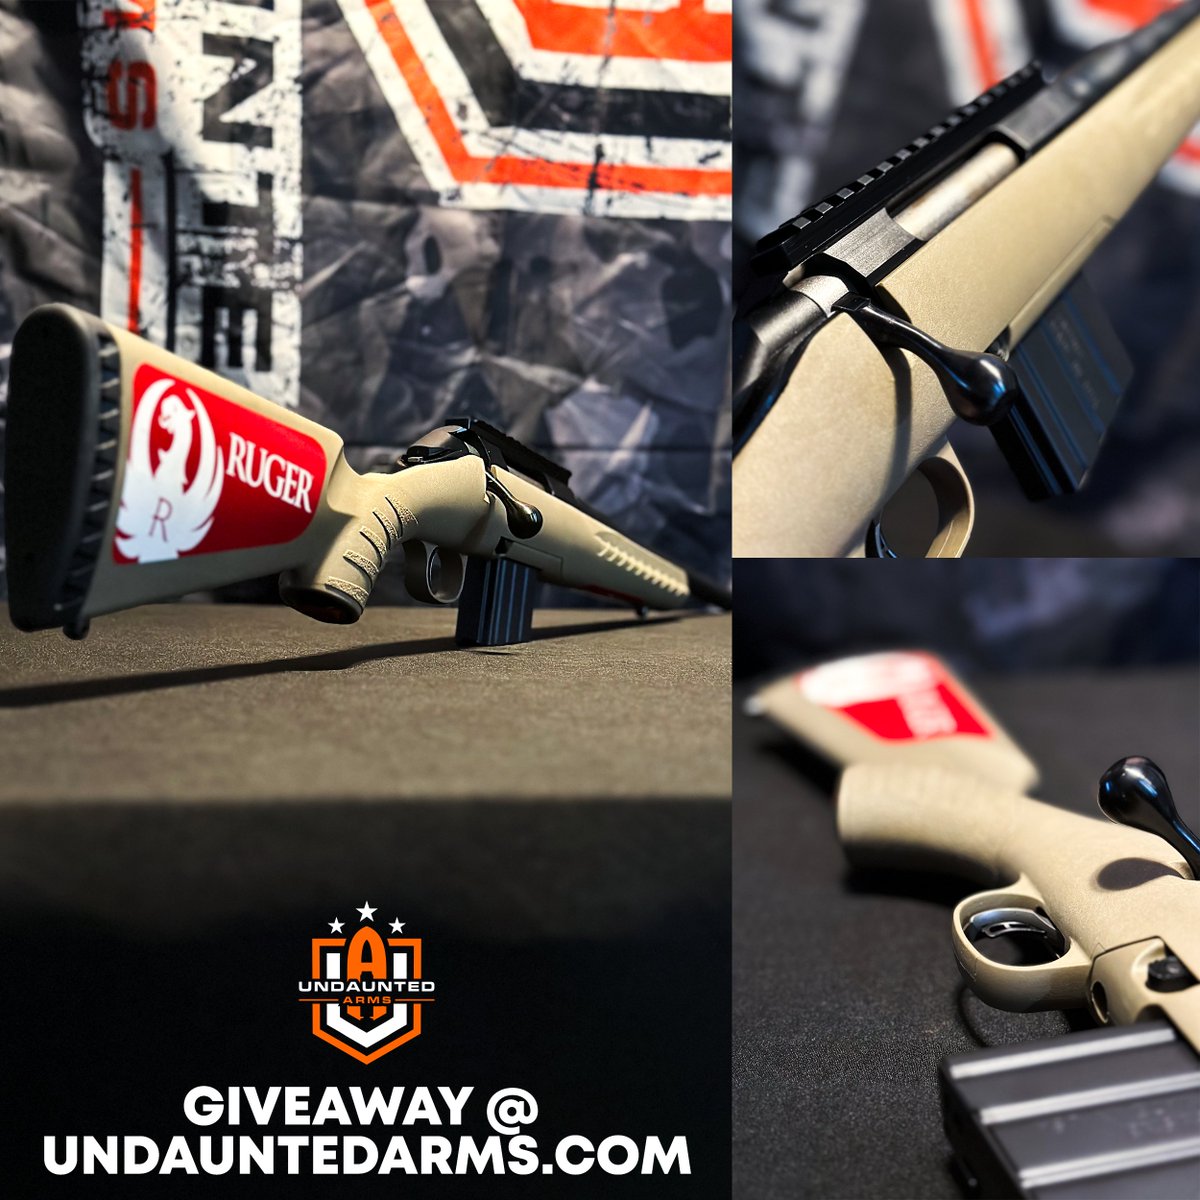 Don’t forget to check out our bad@$& giveaway! undauntedarms.com #progun #2a #guns #giveaway